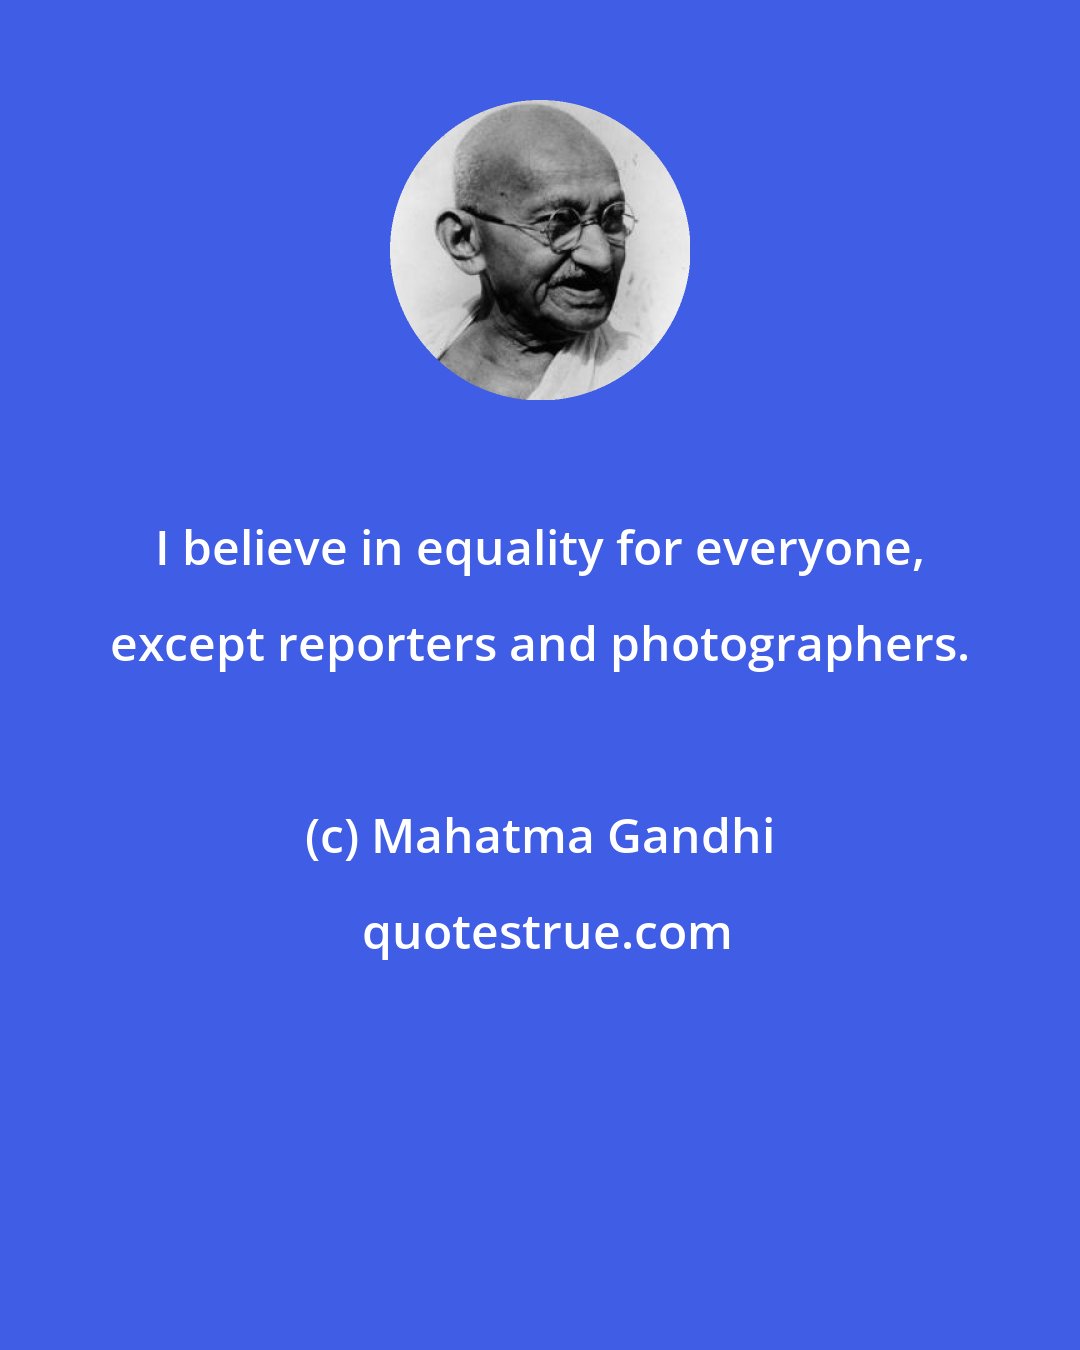 Mahatma Gandhi: I believe in equality for everyone, except reporters and photographers.